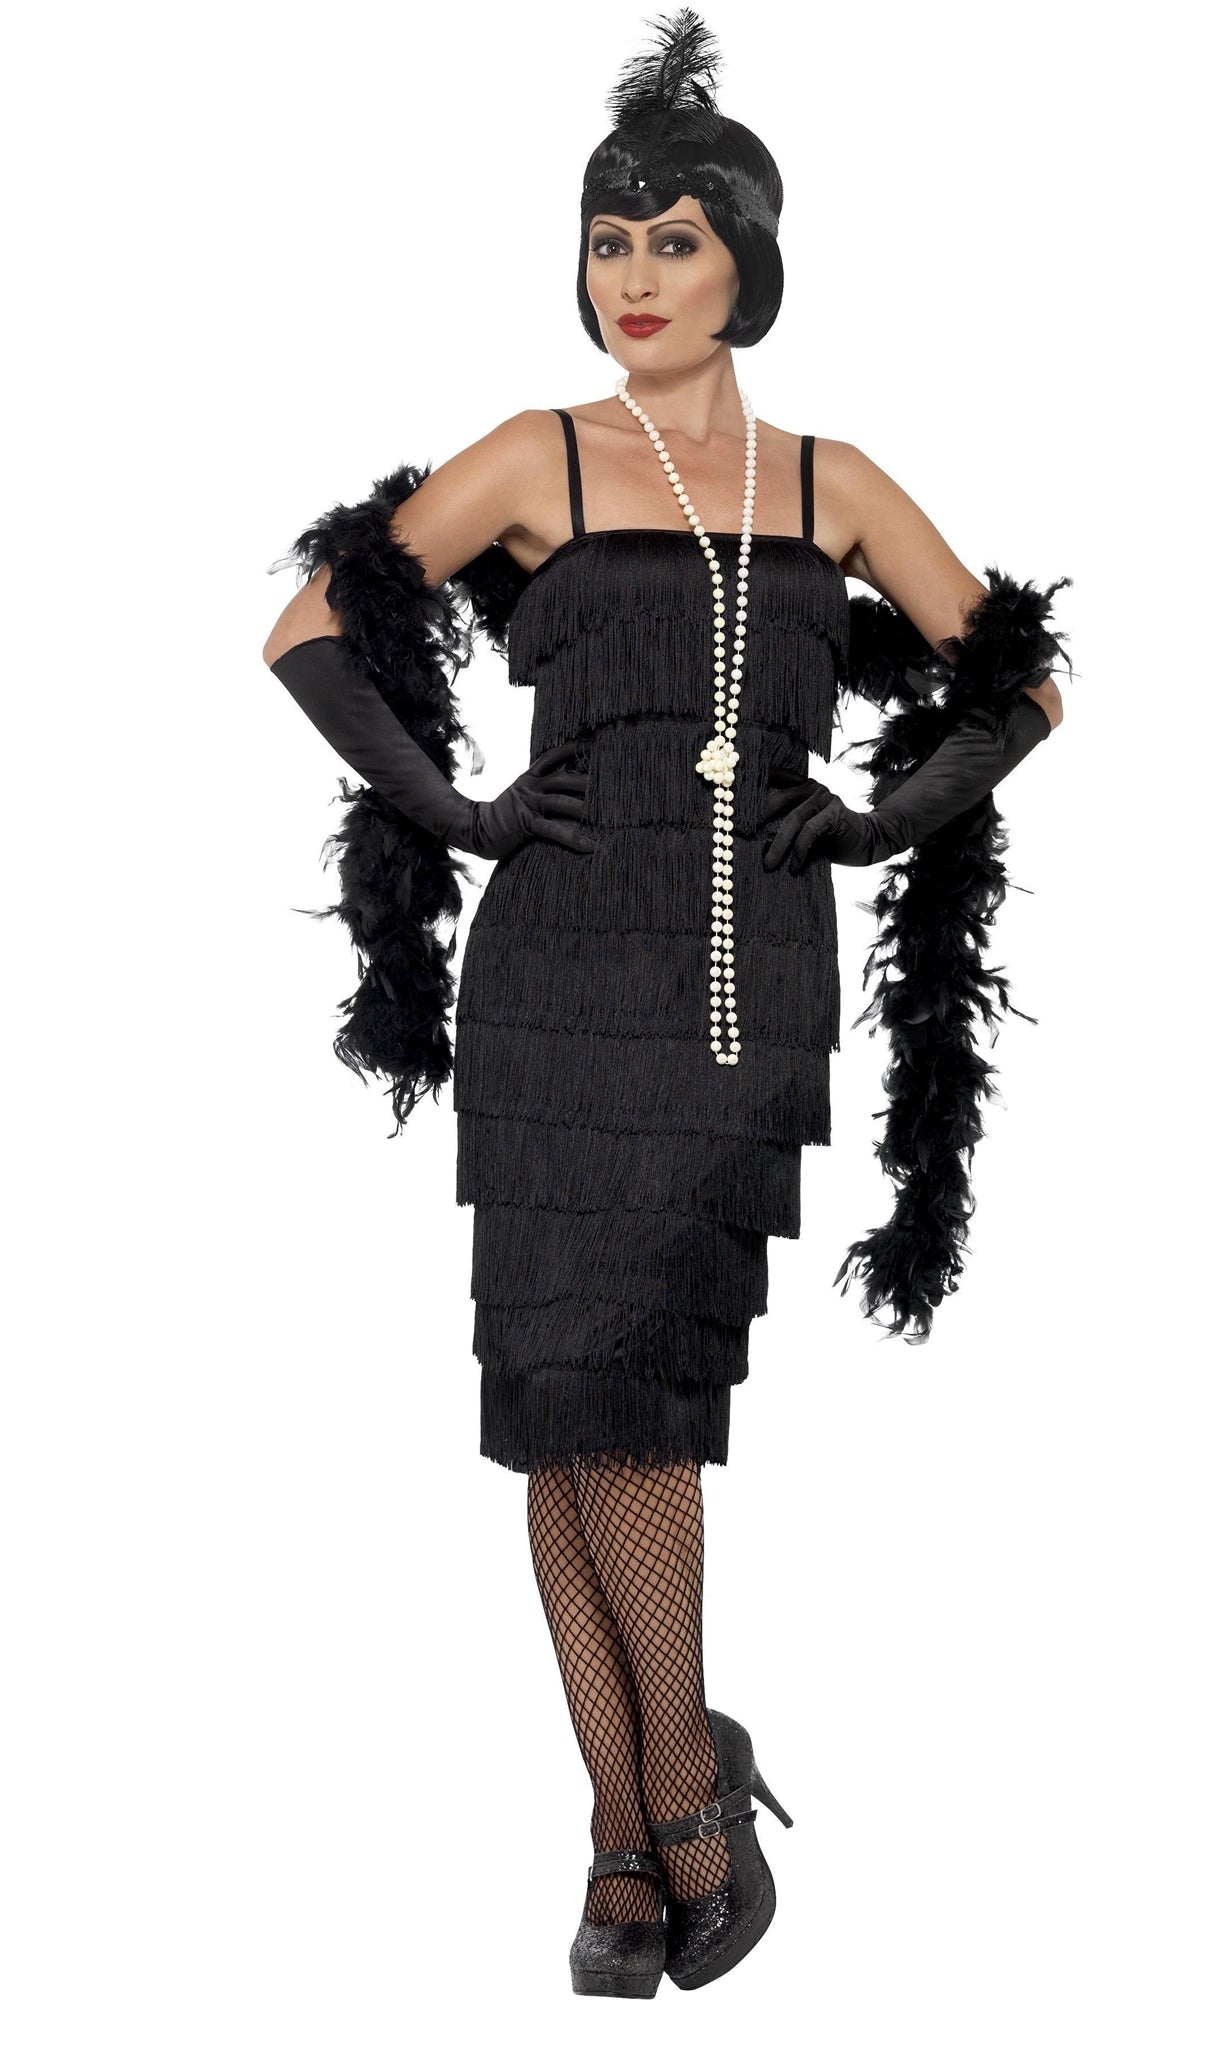 Long black tassel flapper dress with headpiece and gloves